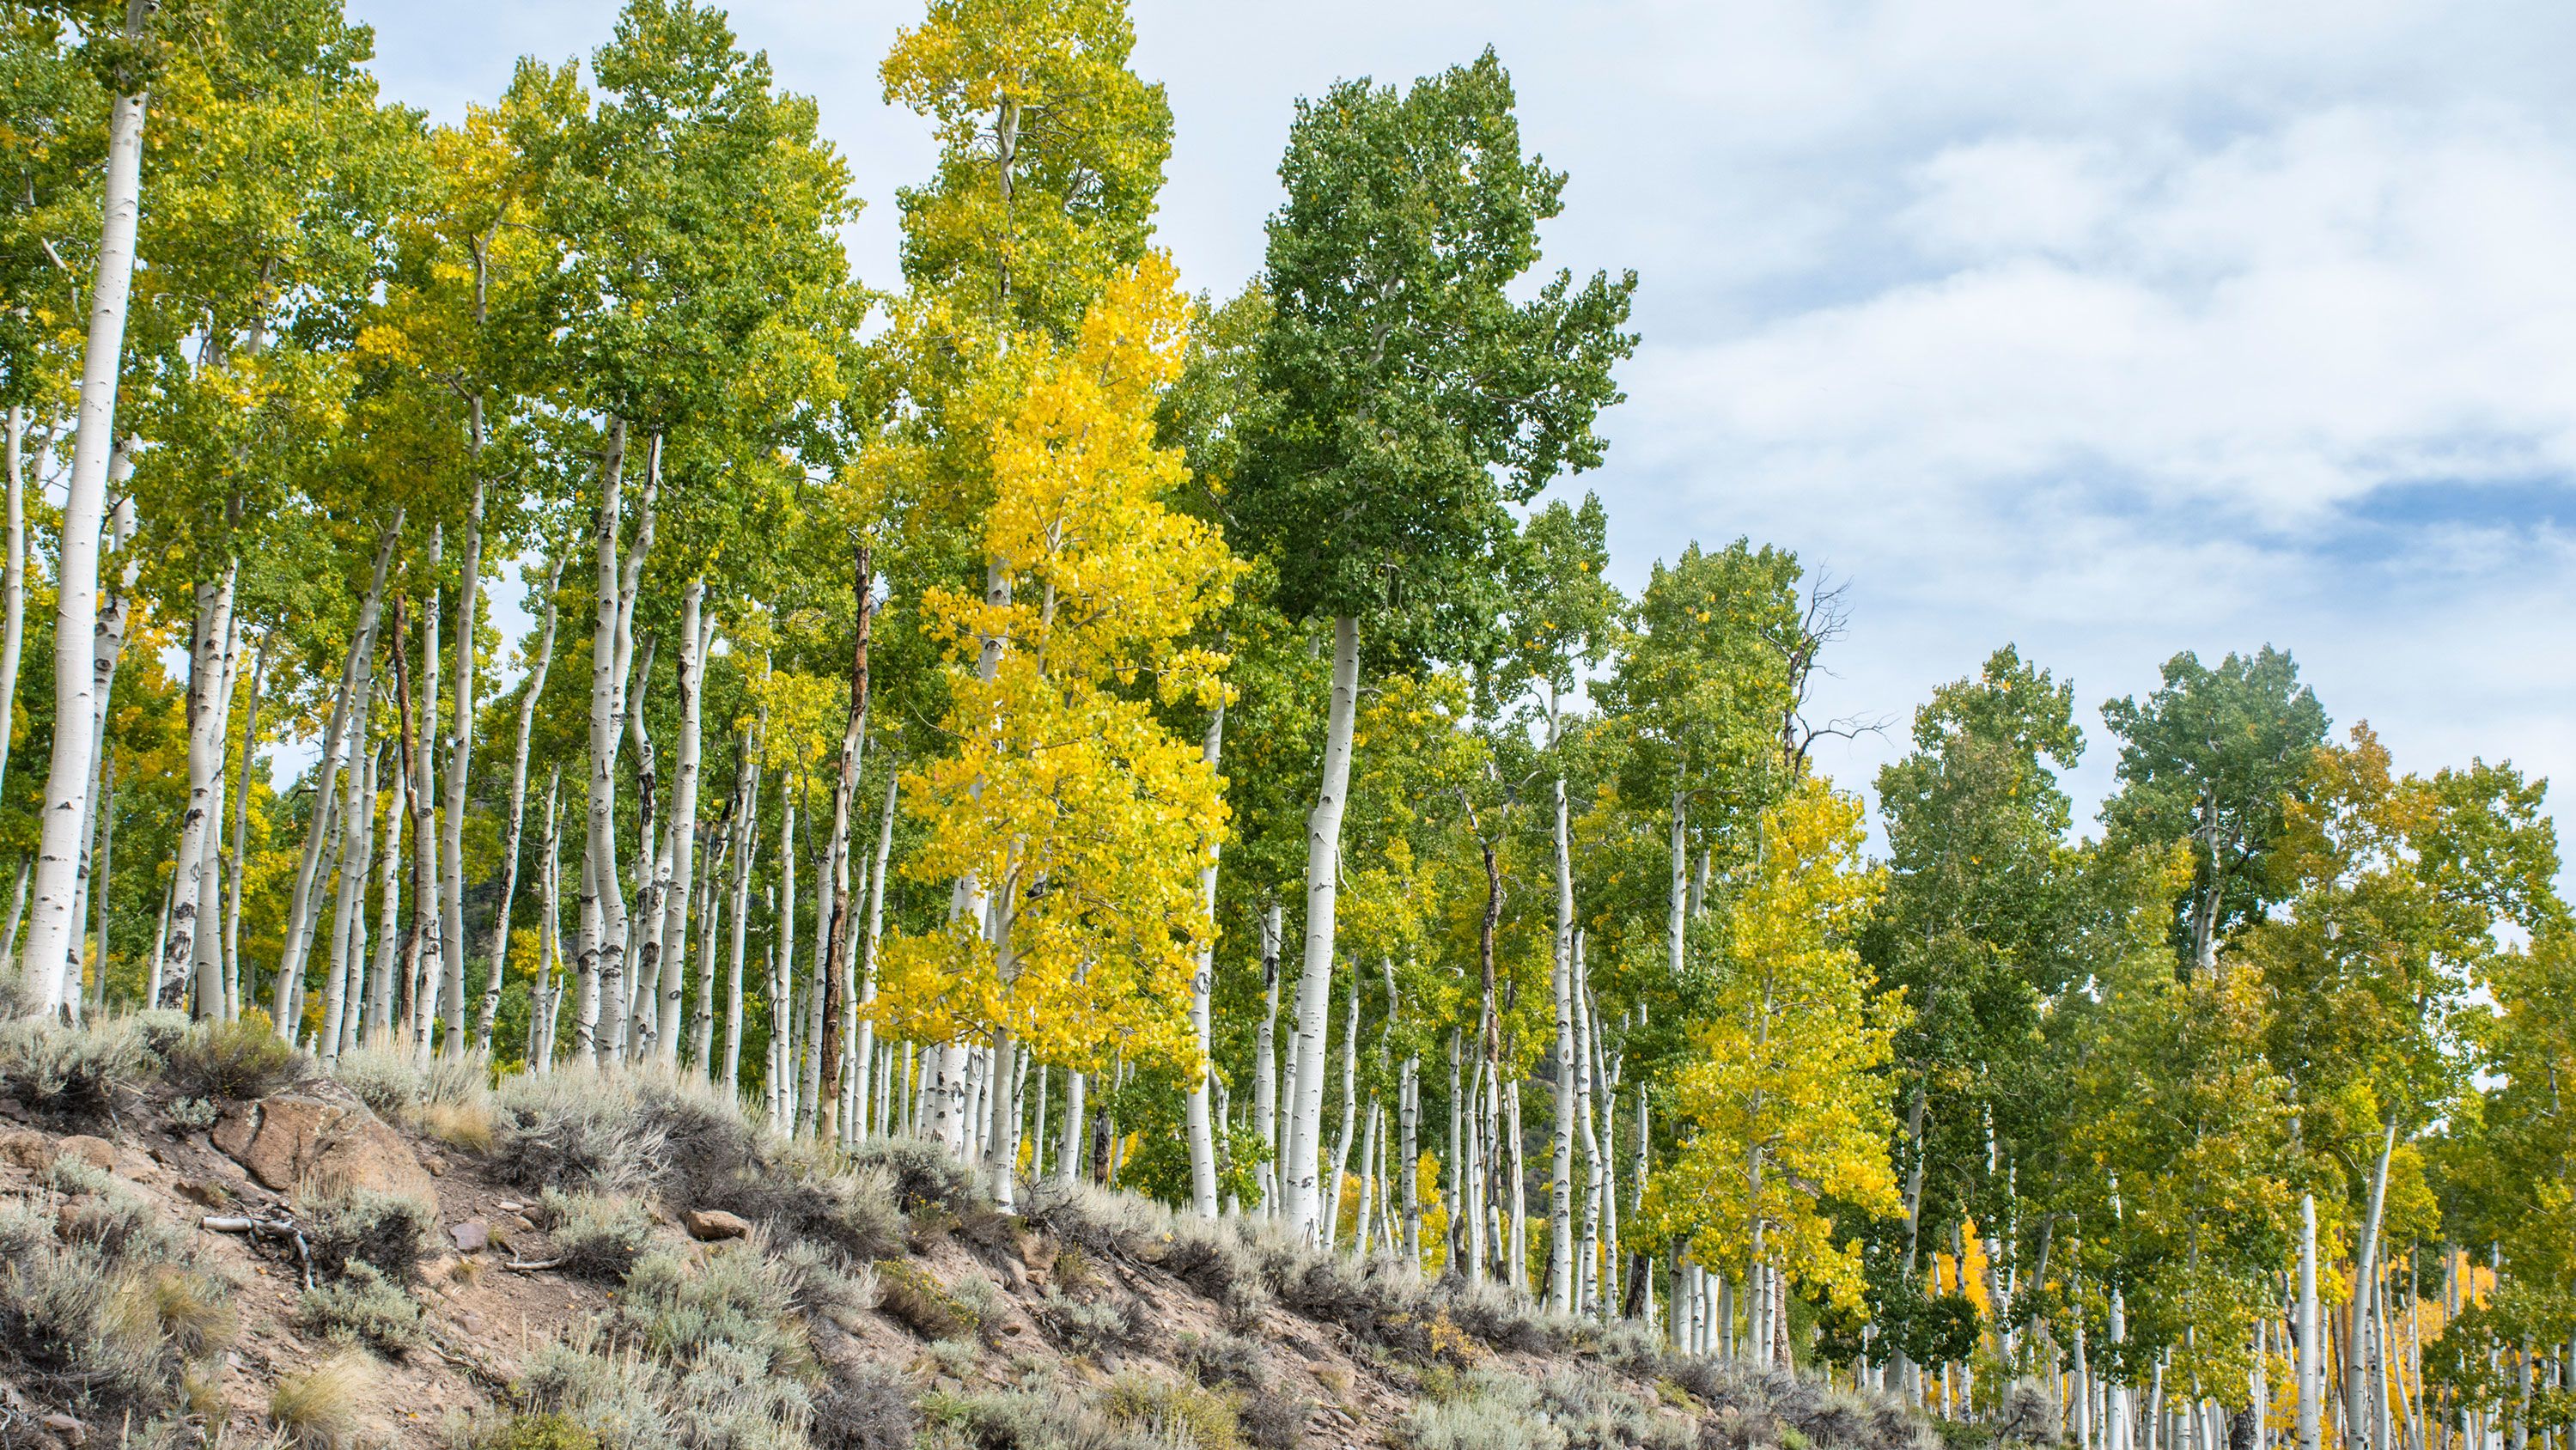 The Pando aspen clone, the world's largest organism, is a sprawling tribe of aspens in Utah.